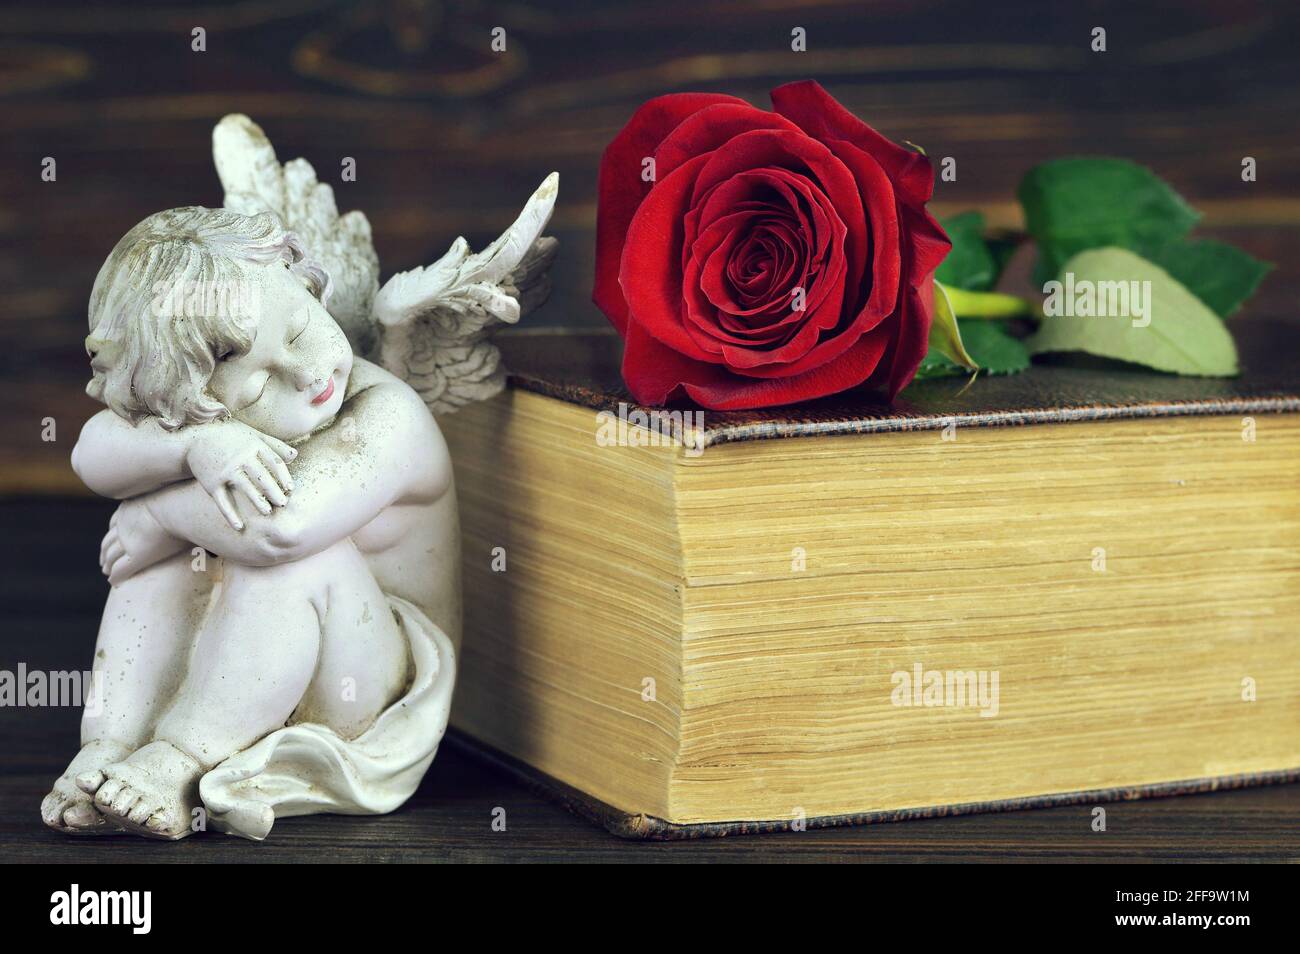 Sleeping angel, red rose and old book Stock Photo